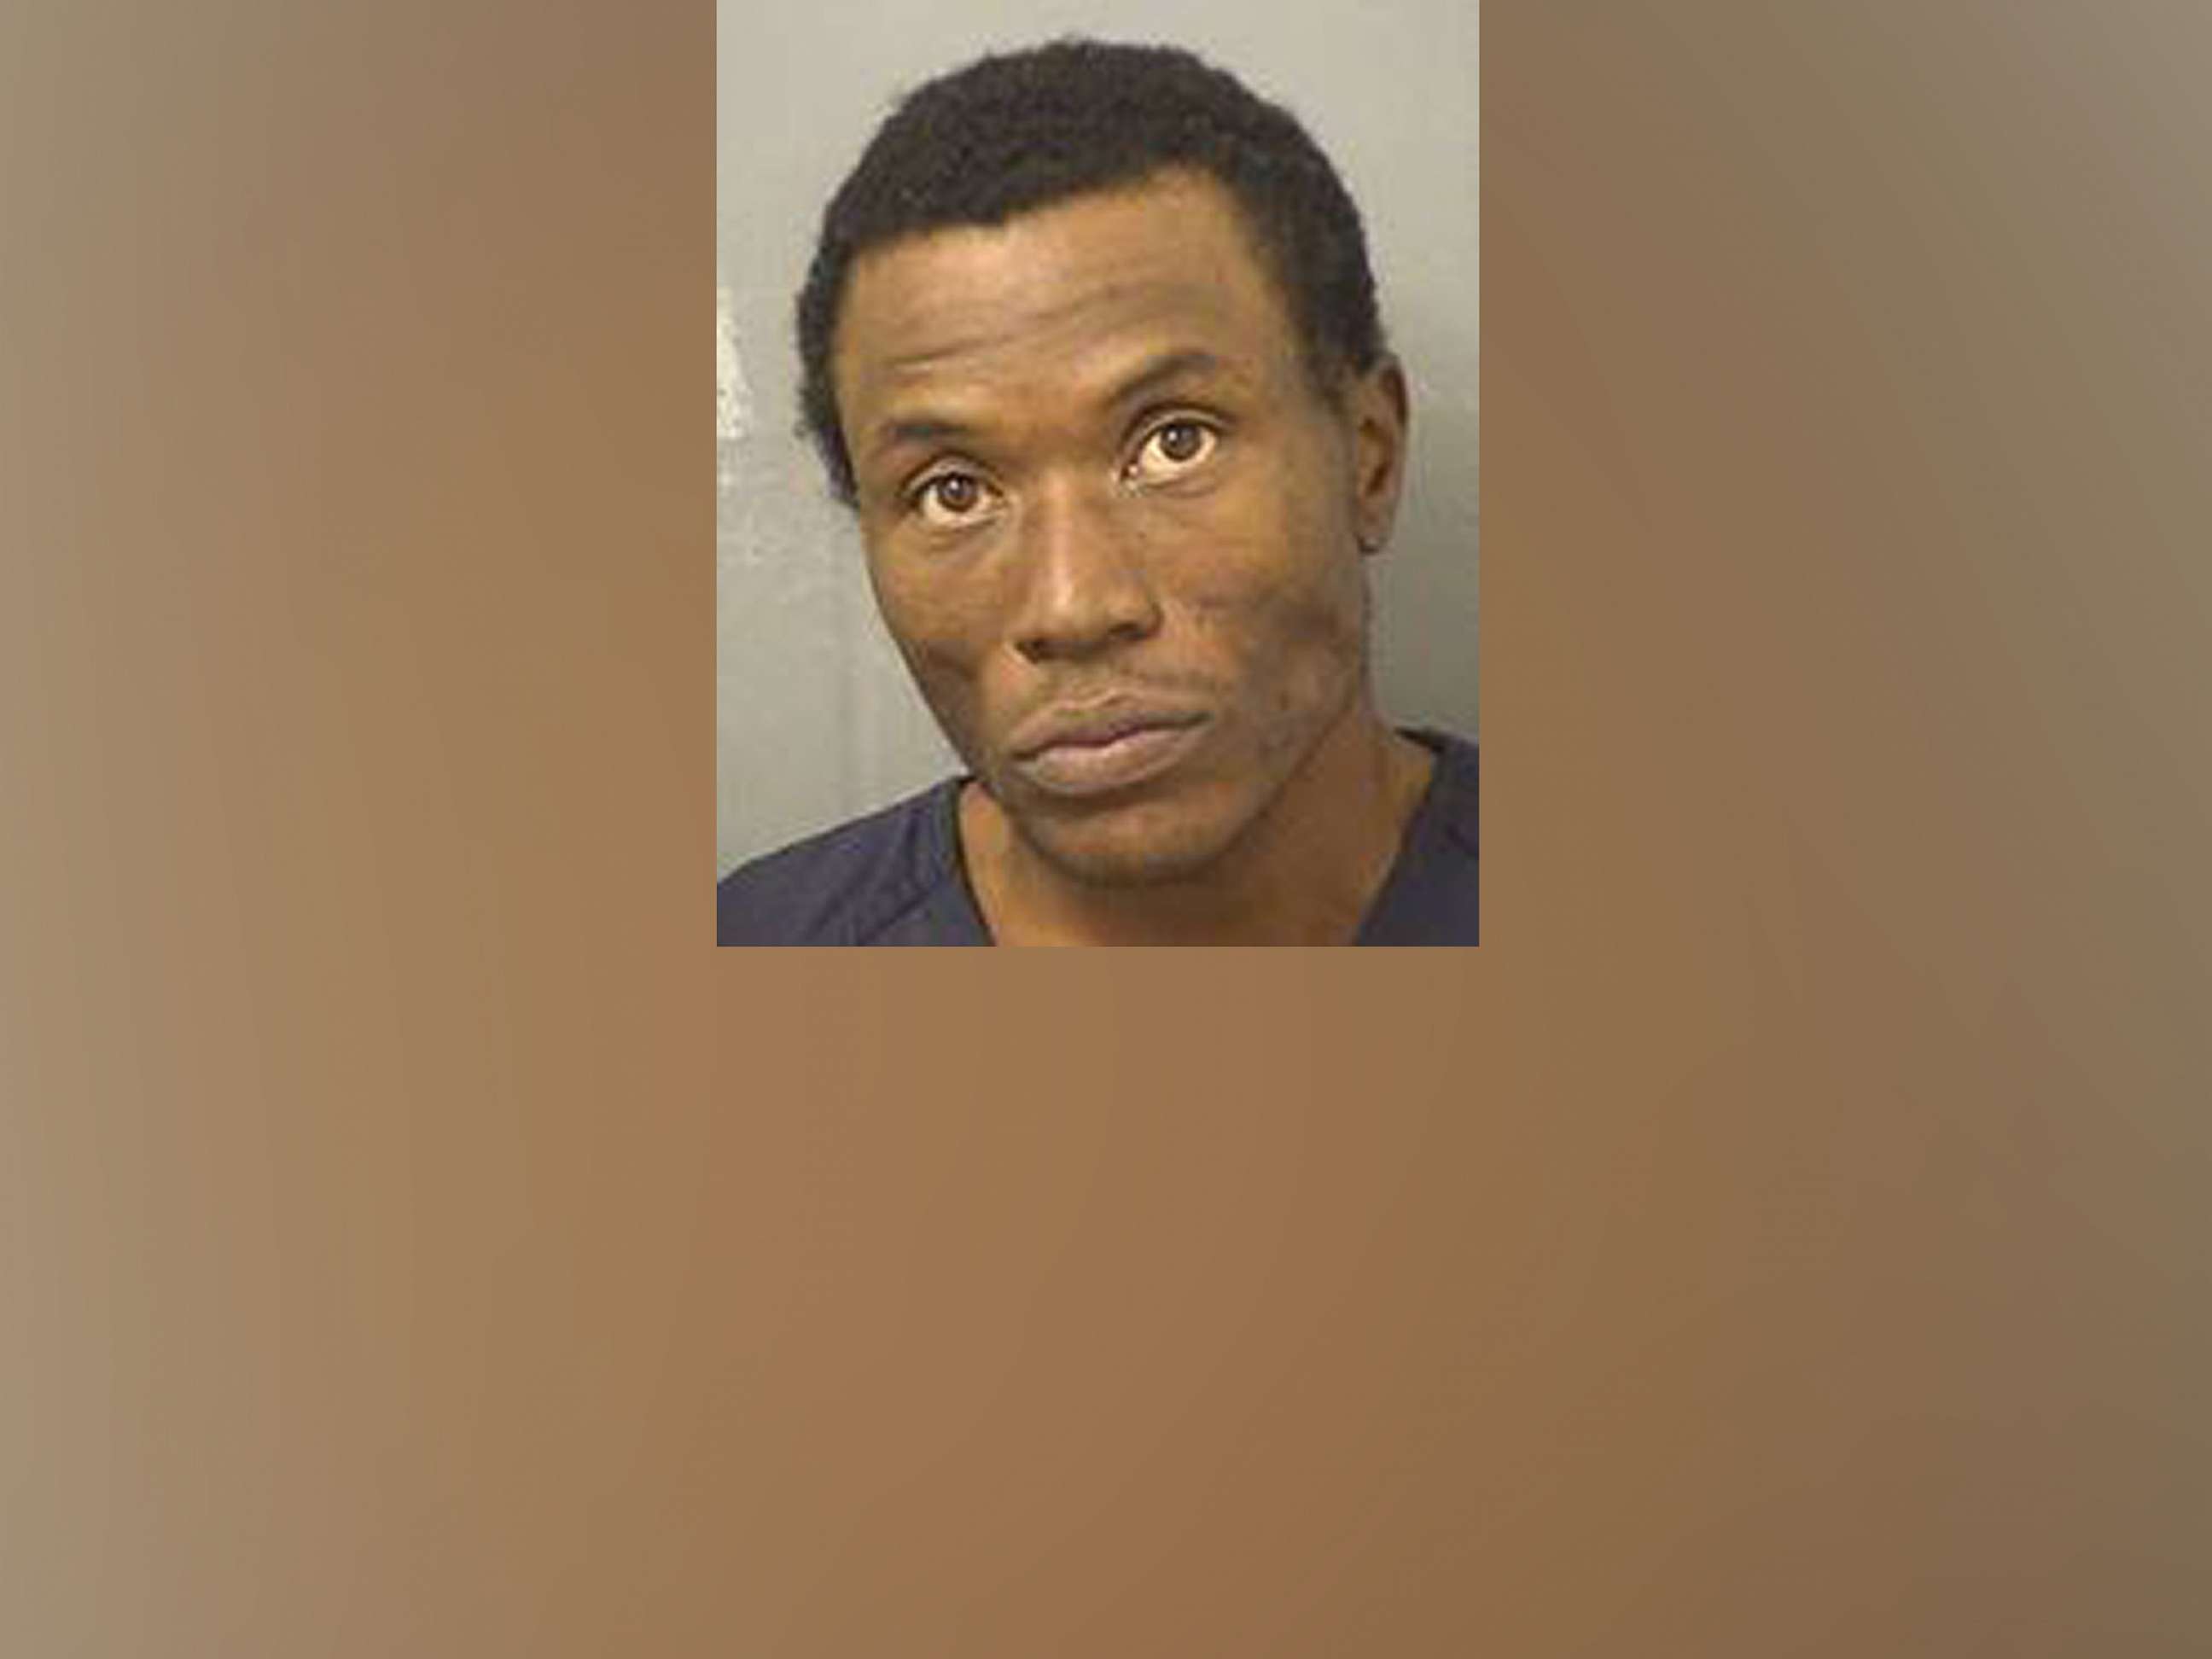 PHOTO: Semmie Lee Williams, 39, was arrested for the murder of 14 year old Ryan Rogers, according to the Palm Beach Gardens police in Florida.